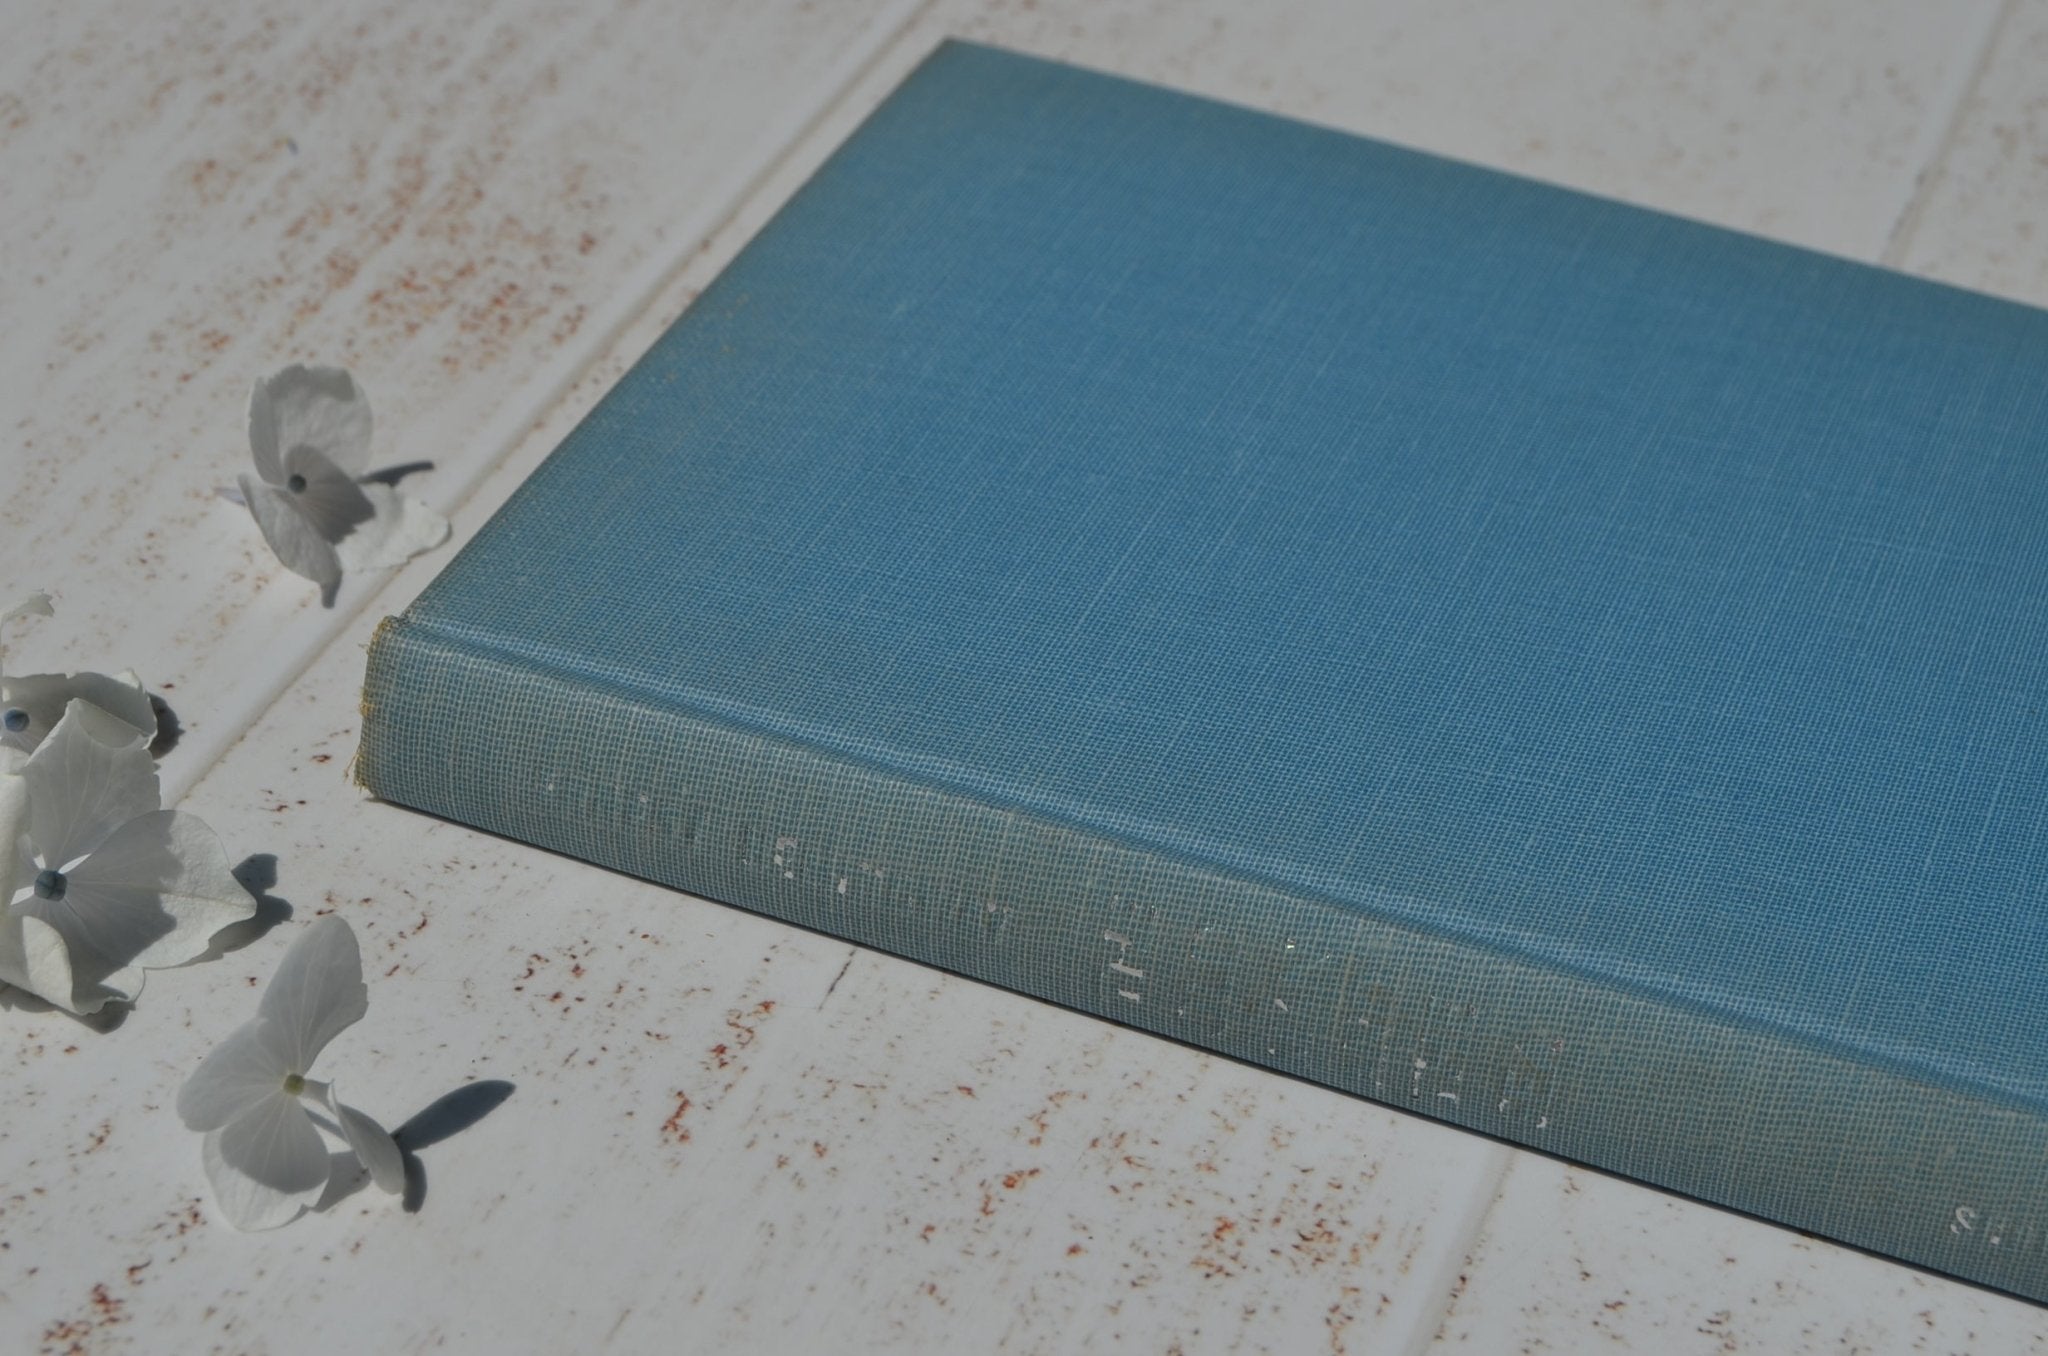 Early Book Club Edition – The Old Man and the Sea by Ernest Hemingway 1952 - Brookfield Books